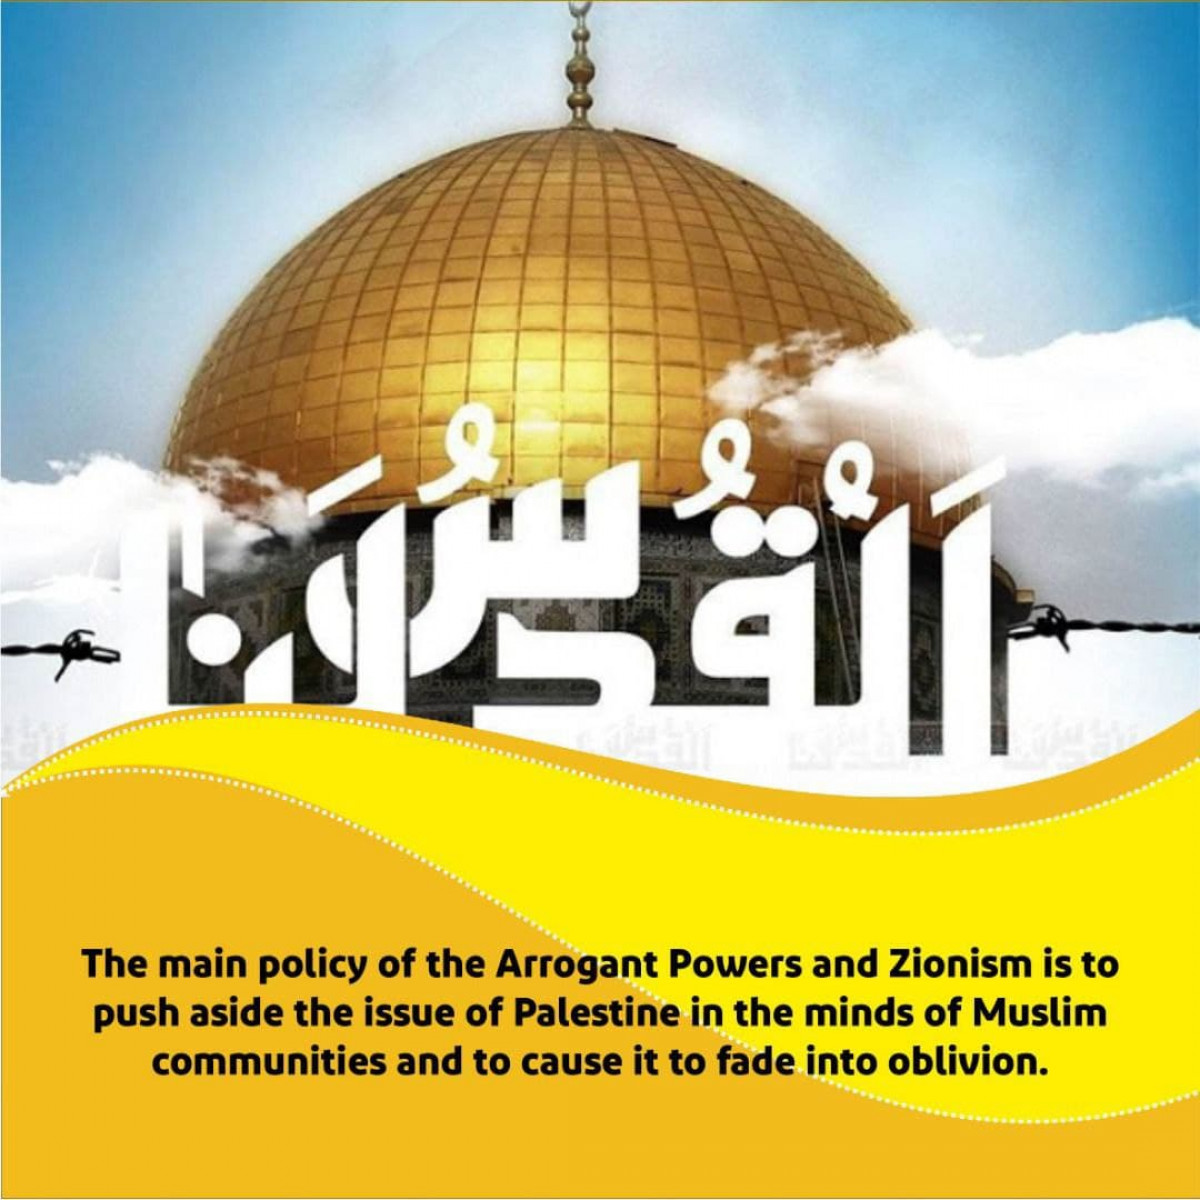 The main policy of the Arrogant Powers and Zionism